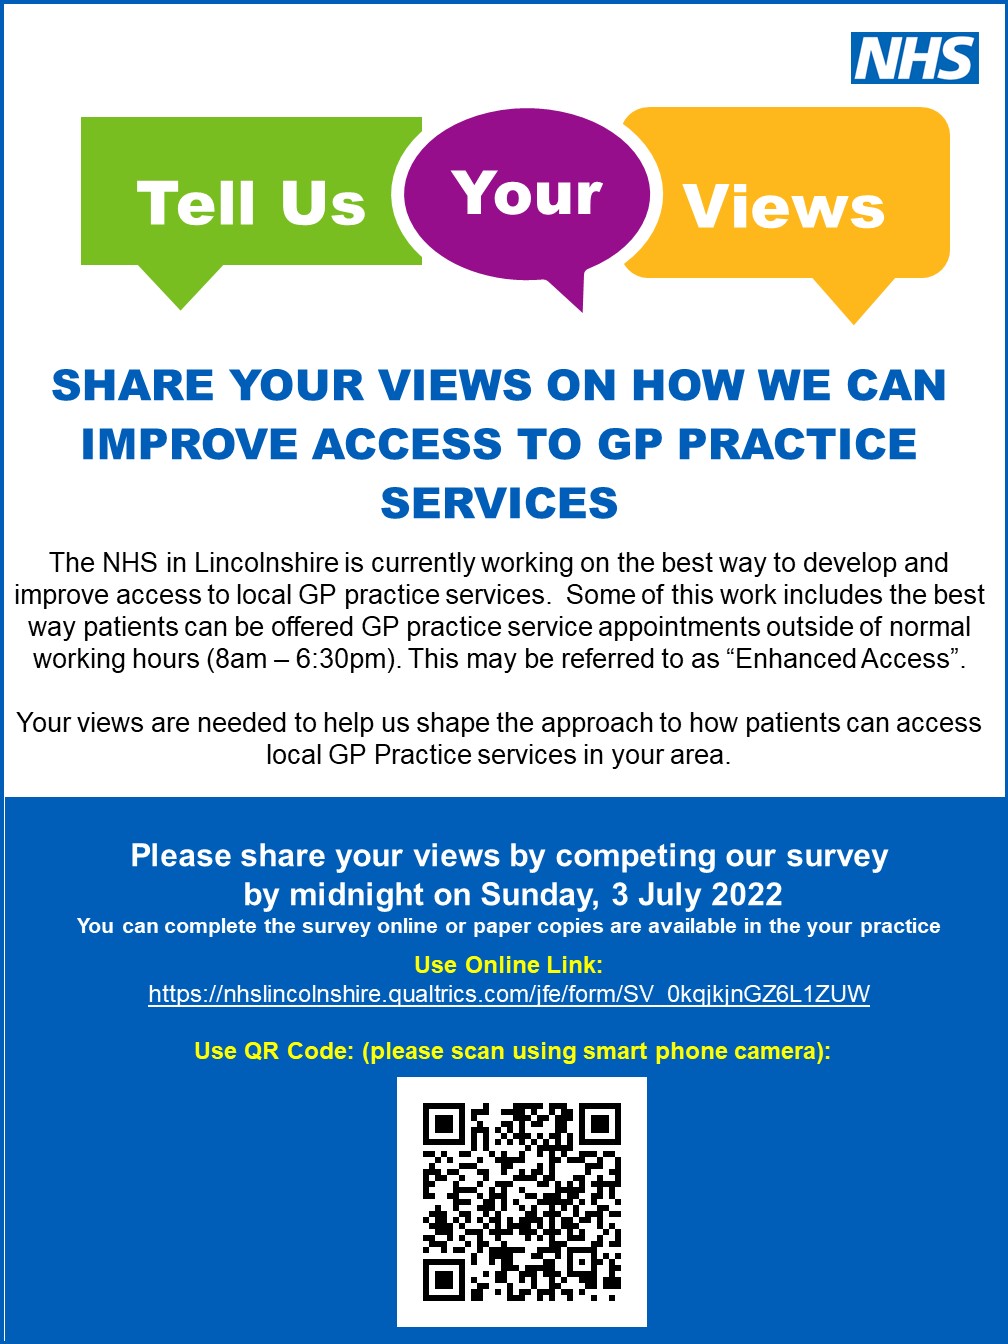 Share your views survey